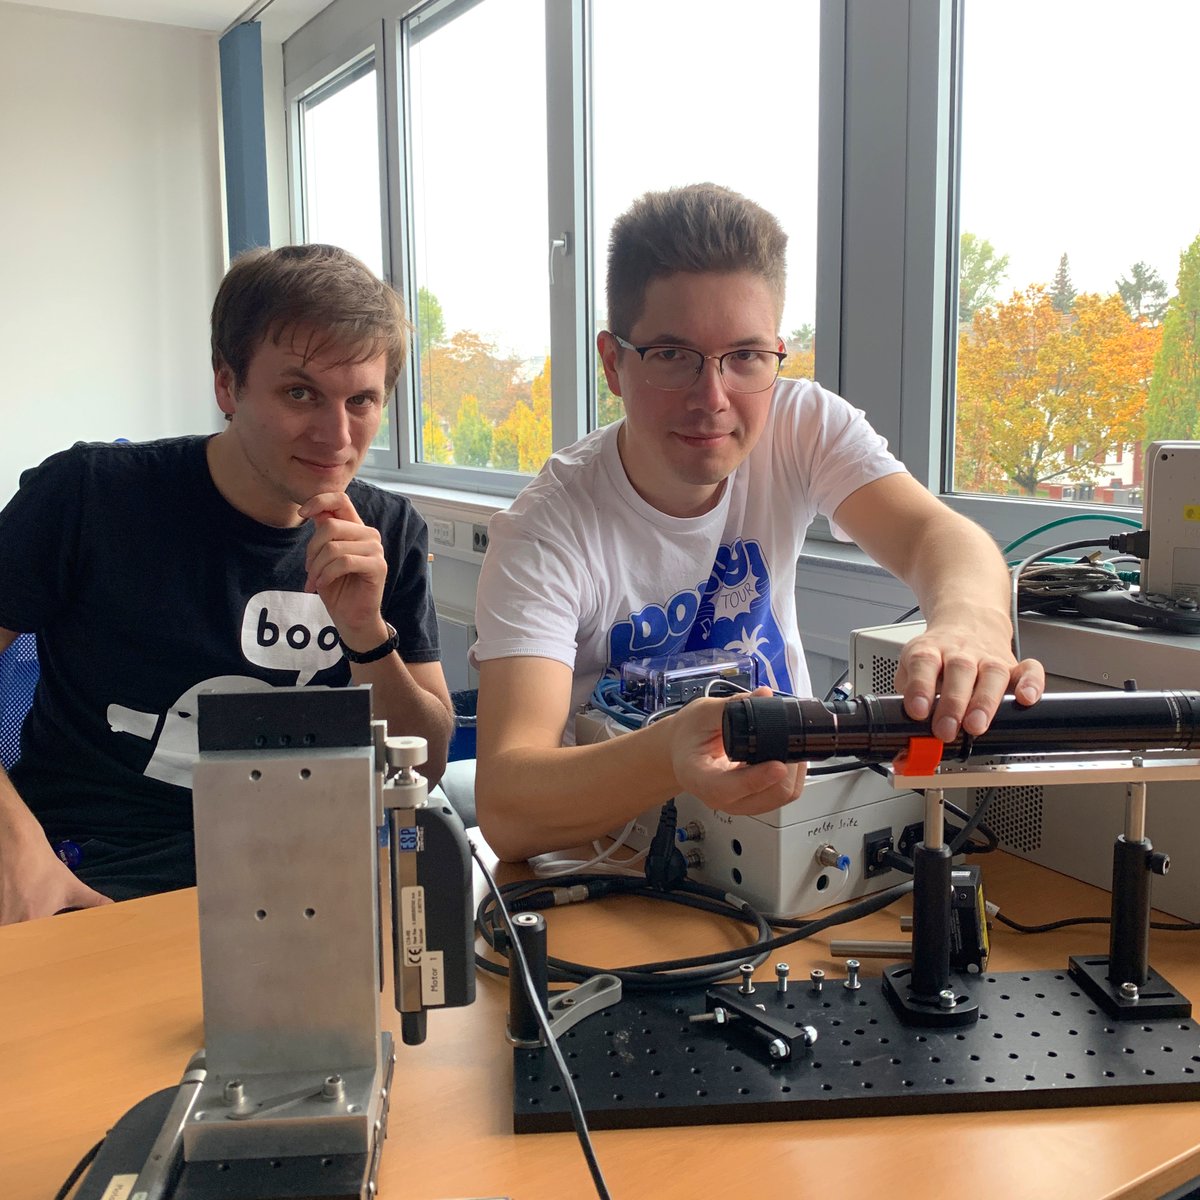 Progress and fine work everywhere: Dr. Tim Böttcher (left) and Matthias Nicolay from our Targetry department are setting up parts for a target alignment prototype.#laser #fusion #energy